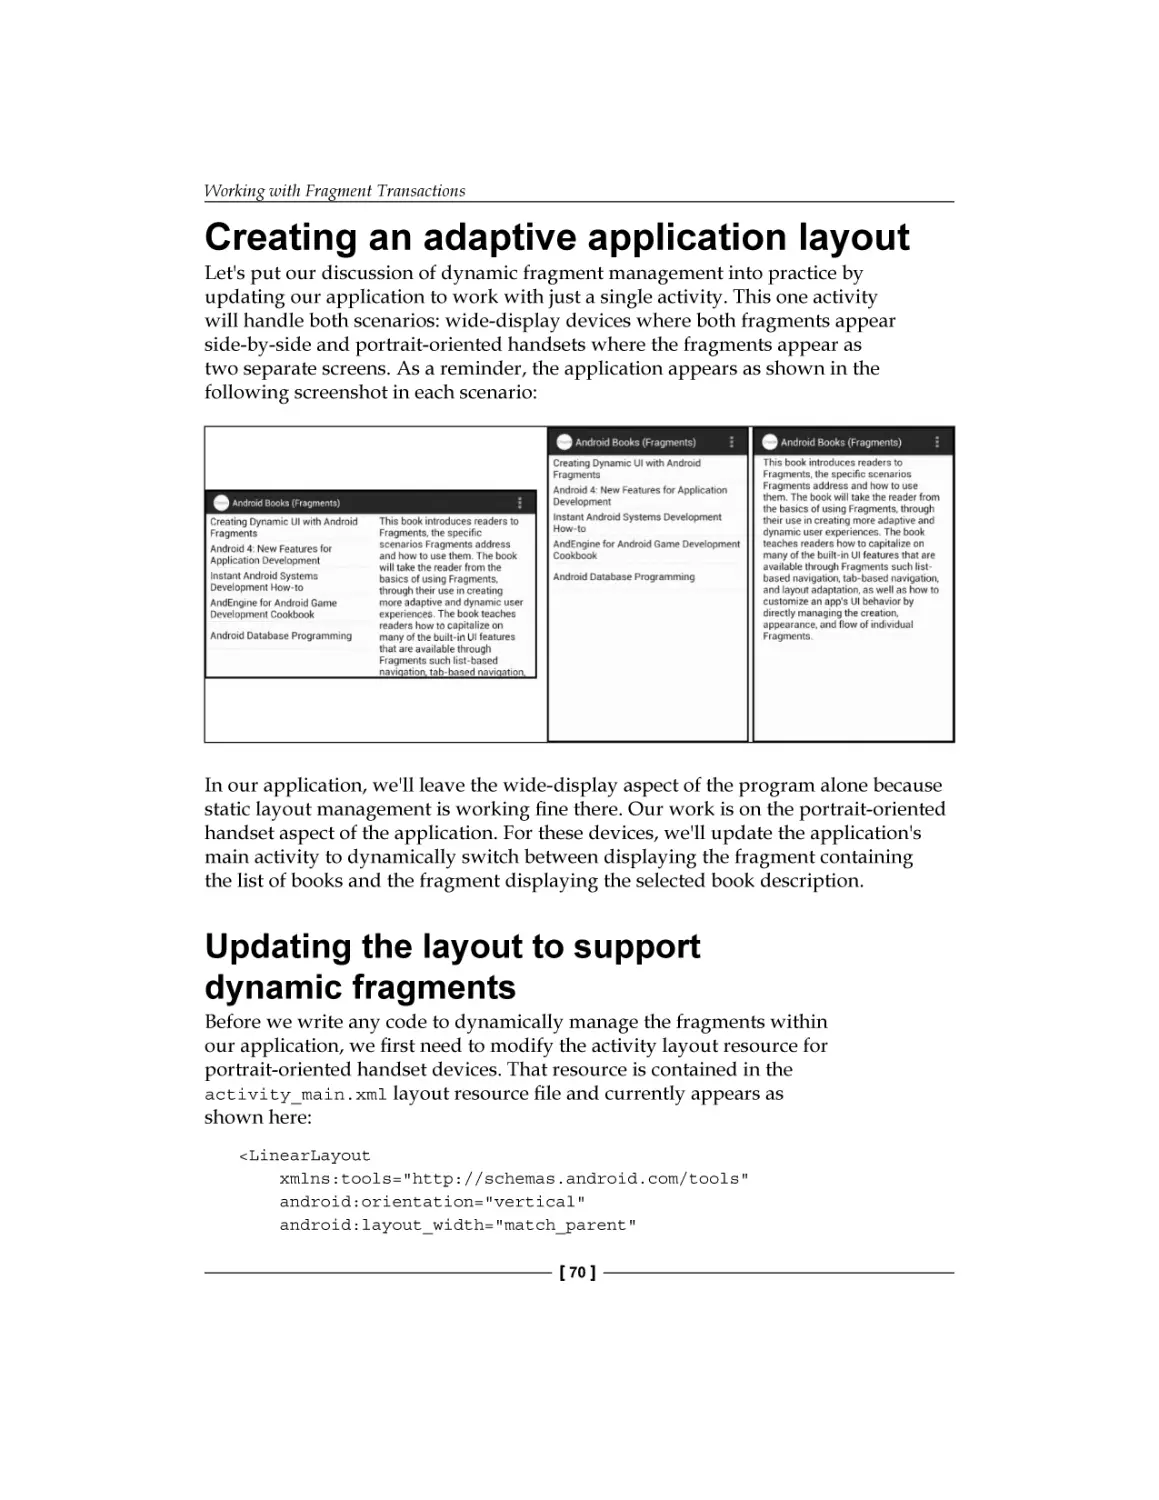 Creating an adaptive application layout
Updating the layout to support